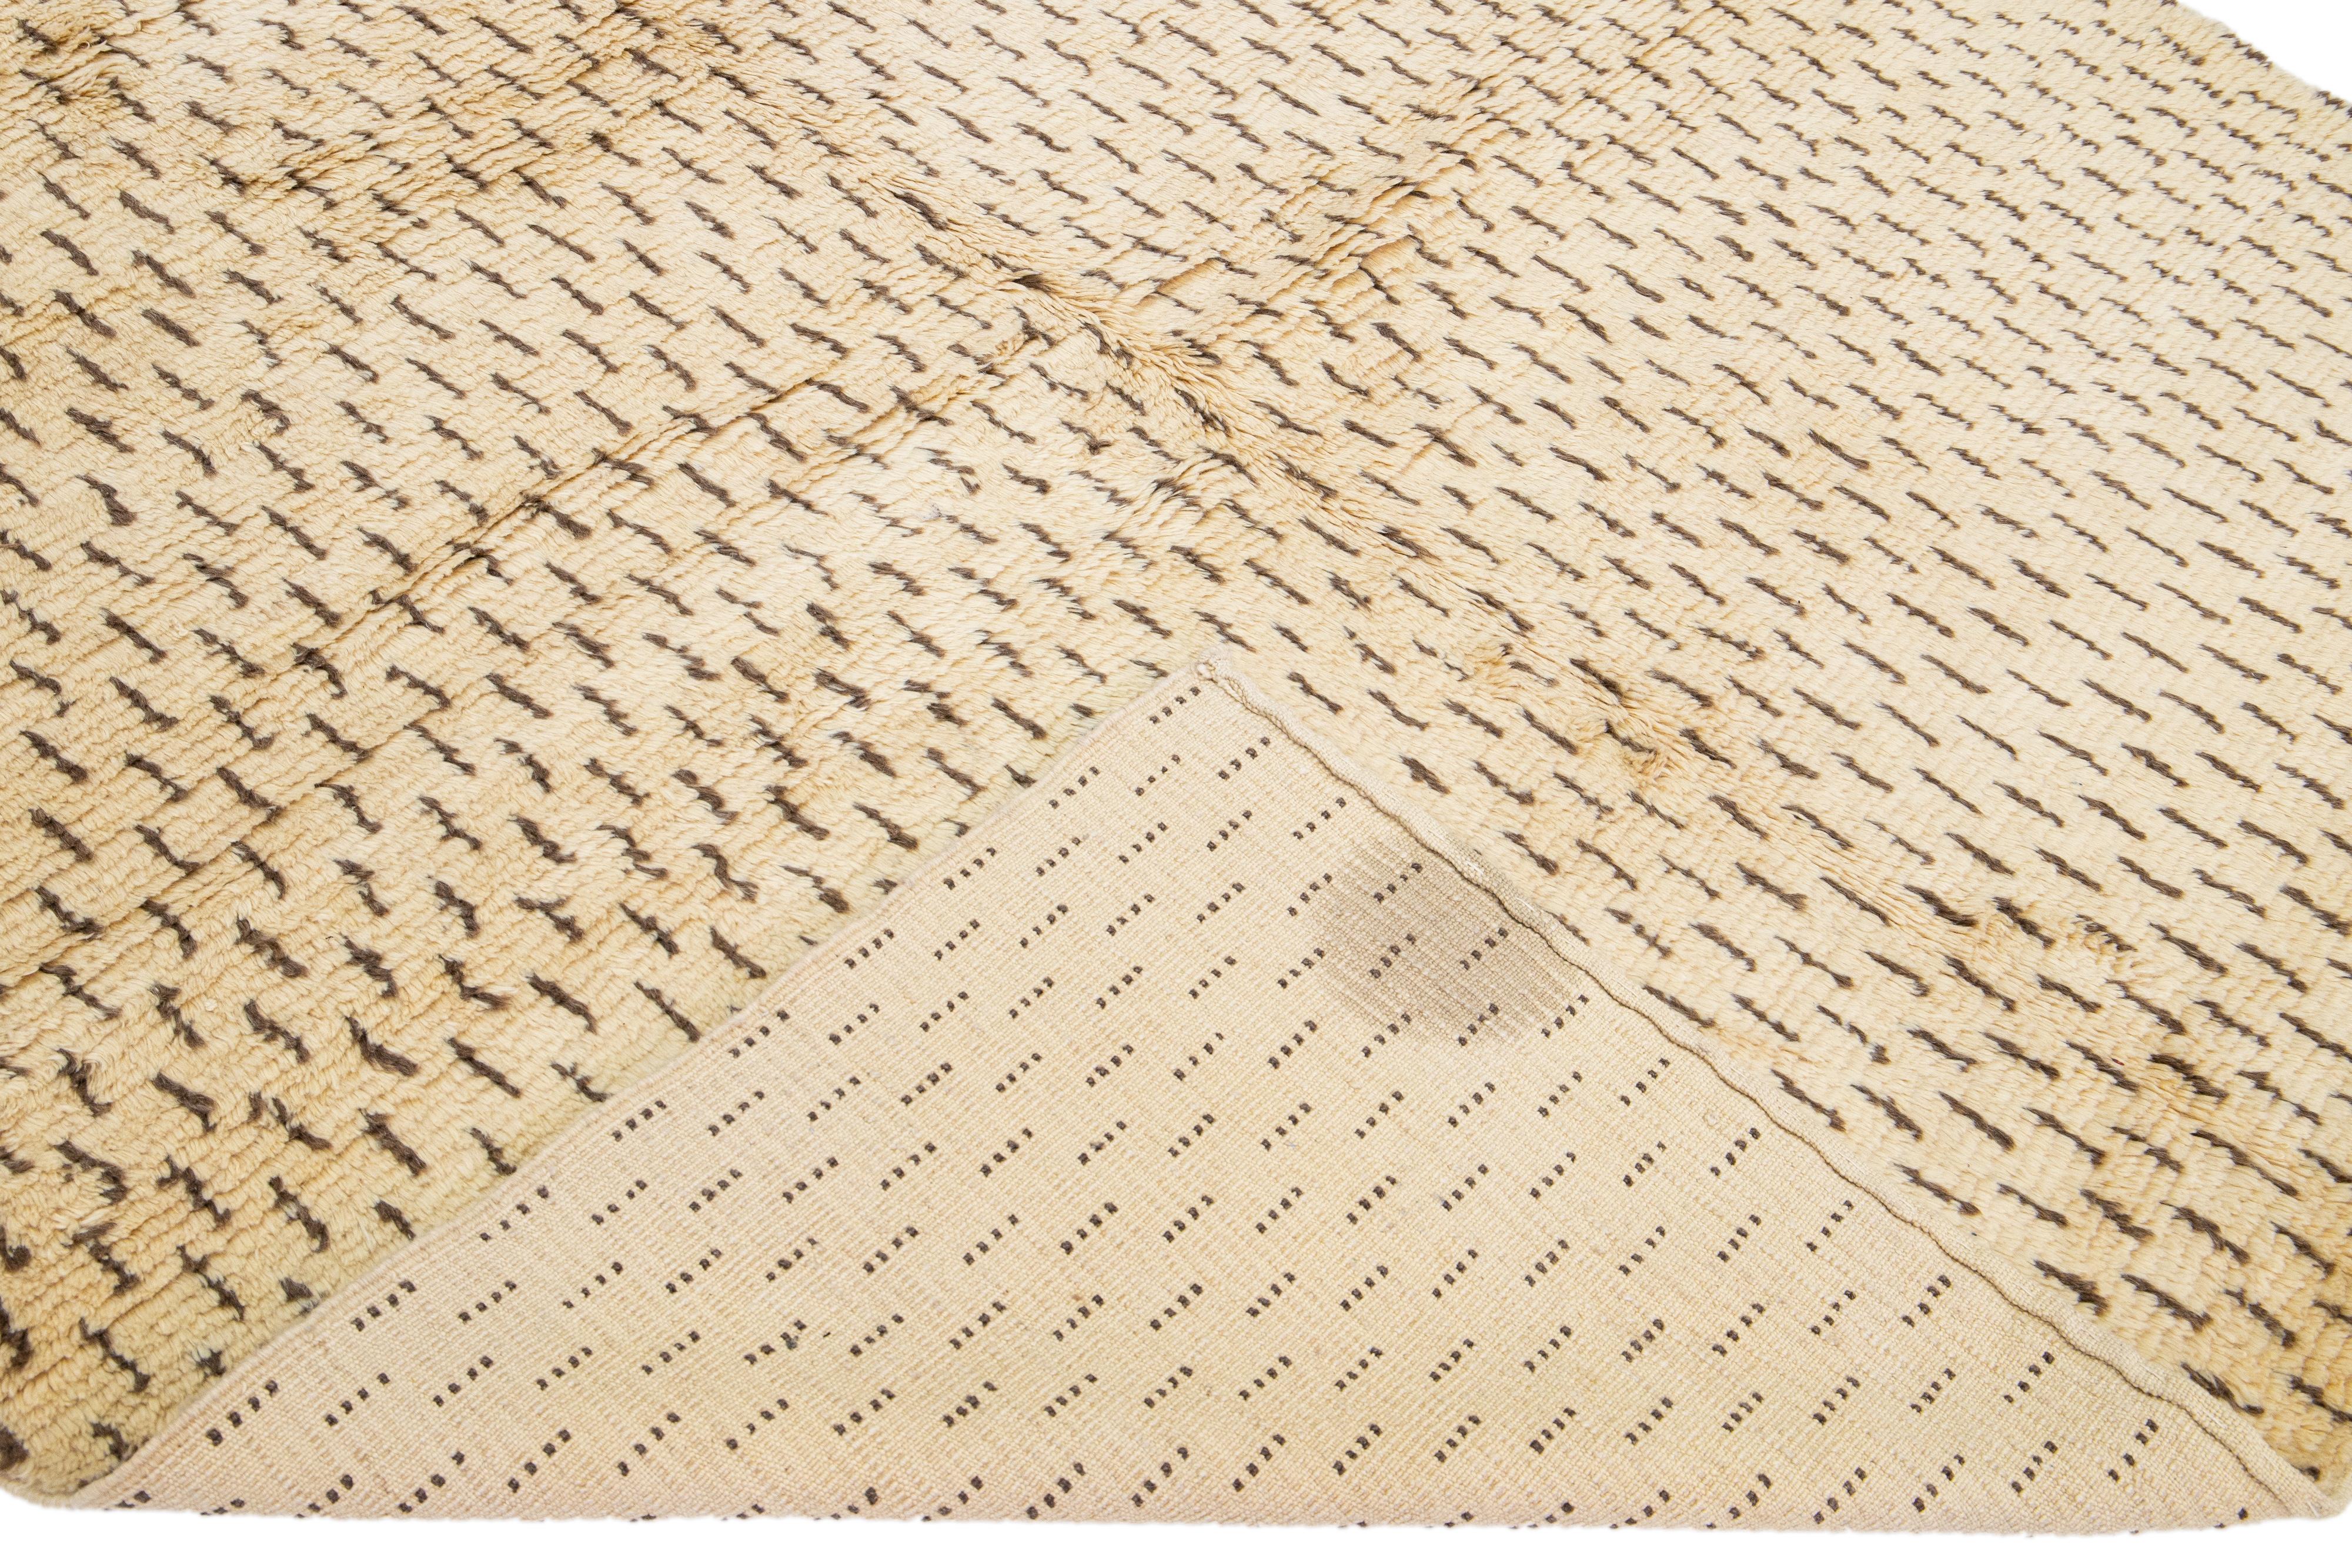 Beautiful modern Moroccan style hand-knotted wool rug with an antique tan-beige field in an all-over geometric abstract design.

This rug measures: 7'1